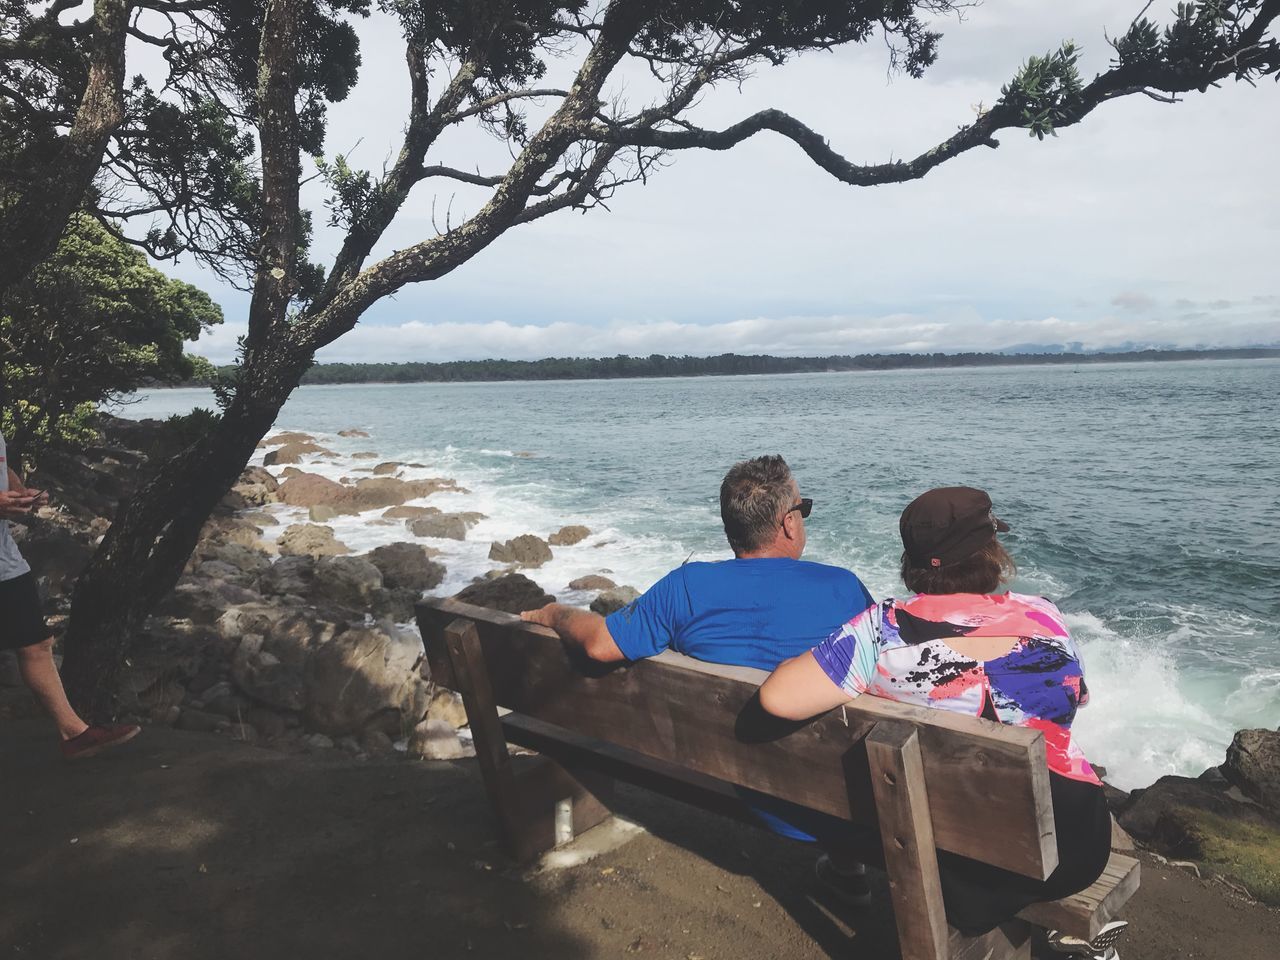 water, sitting, men, real people, sea, togetherness, leisure activity, two people, nature, lifestyles, males, seat, bonding, rear view, casual clothing, people, day, adult, tree, outdoors, positive emotion, couple - relationship